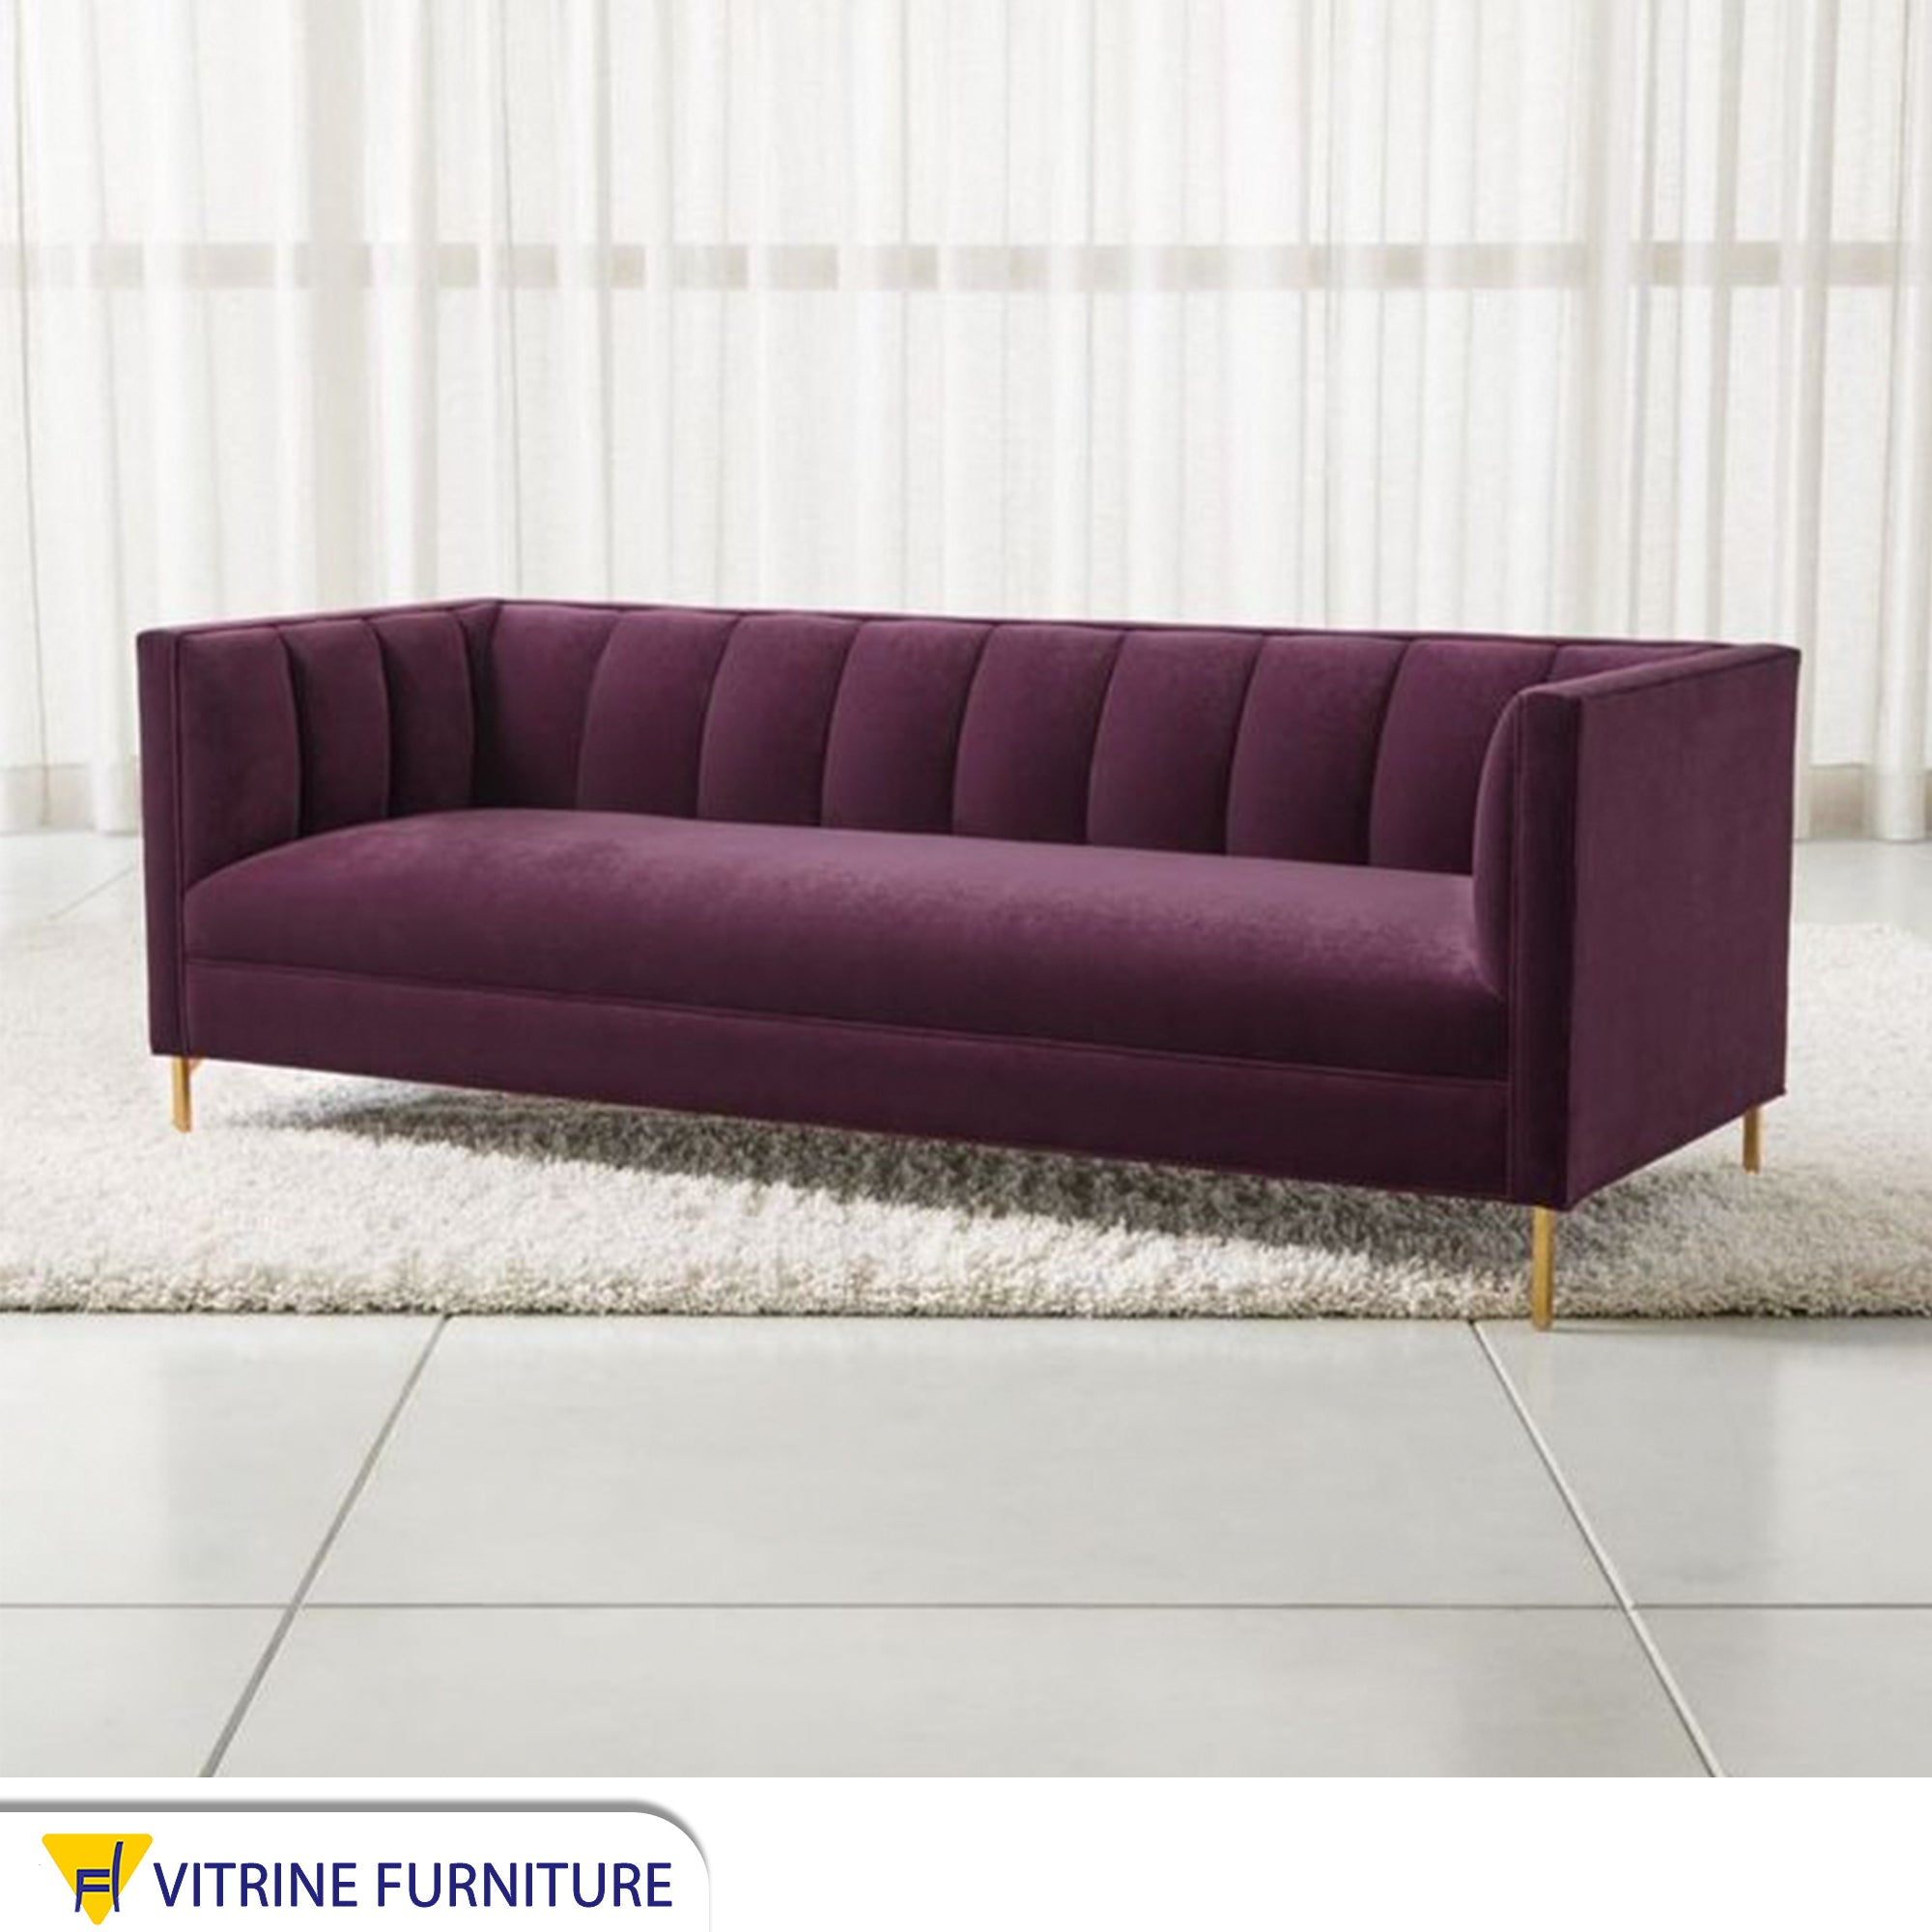 A burgundy sofa with successive recessed lines on the backrest